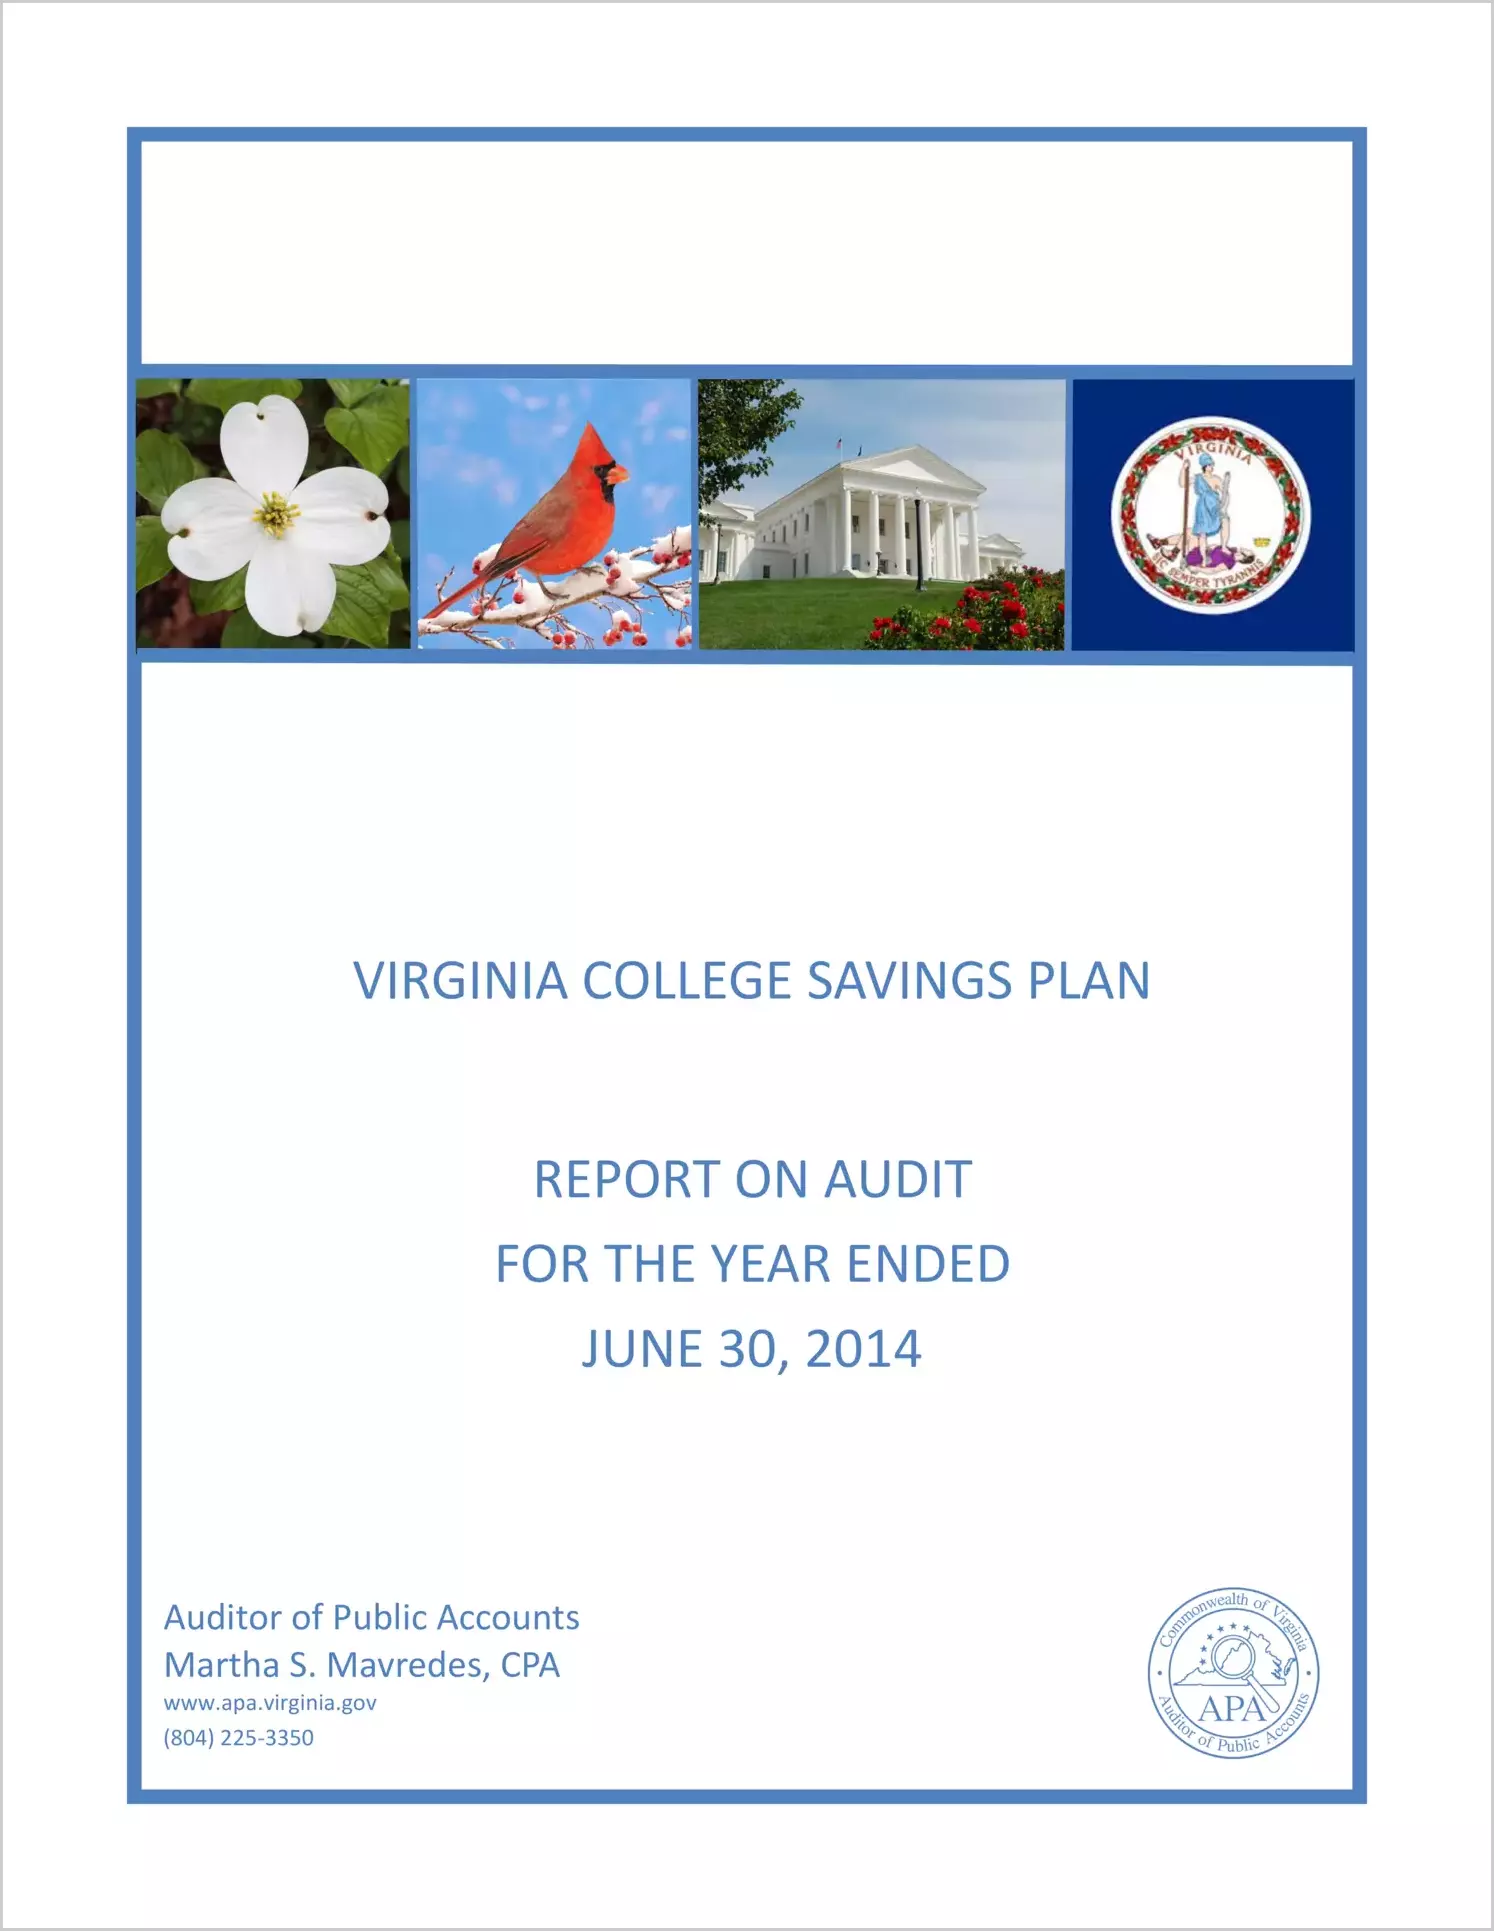 Virginia College Savings Plan for the year ended June 30, 2014